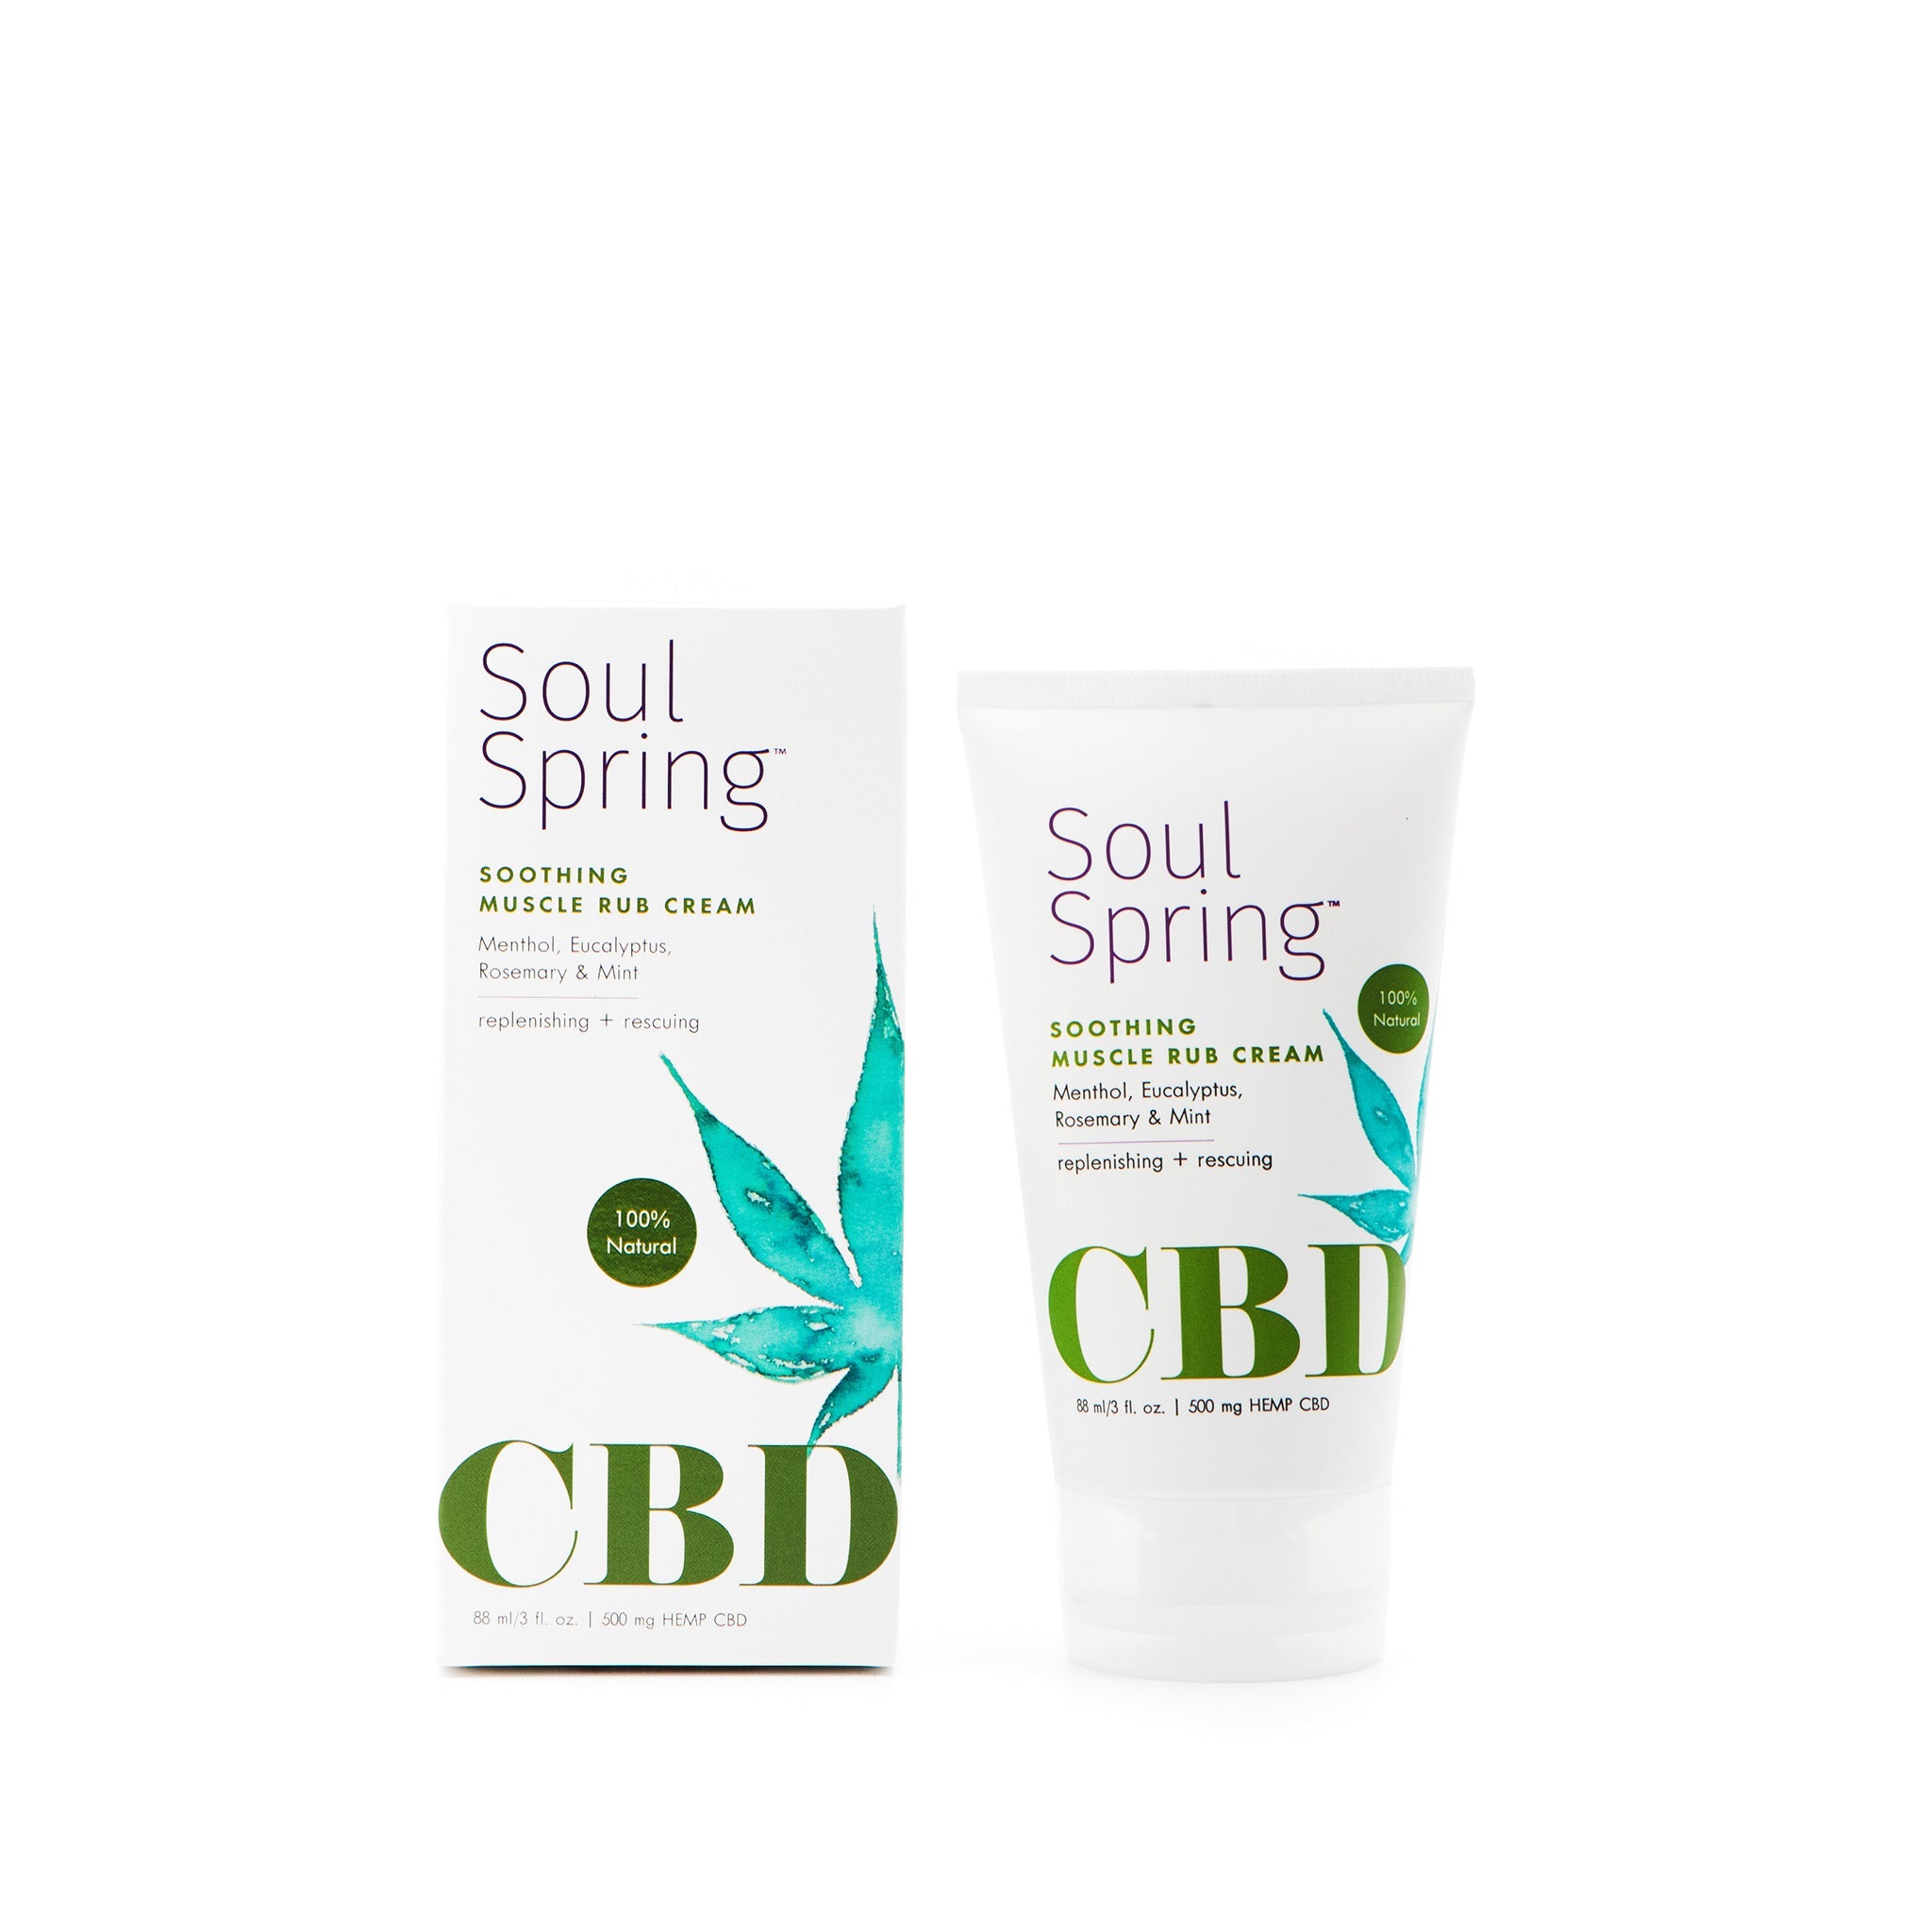 SoulSpring Soothing Muscle Rub Cream